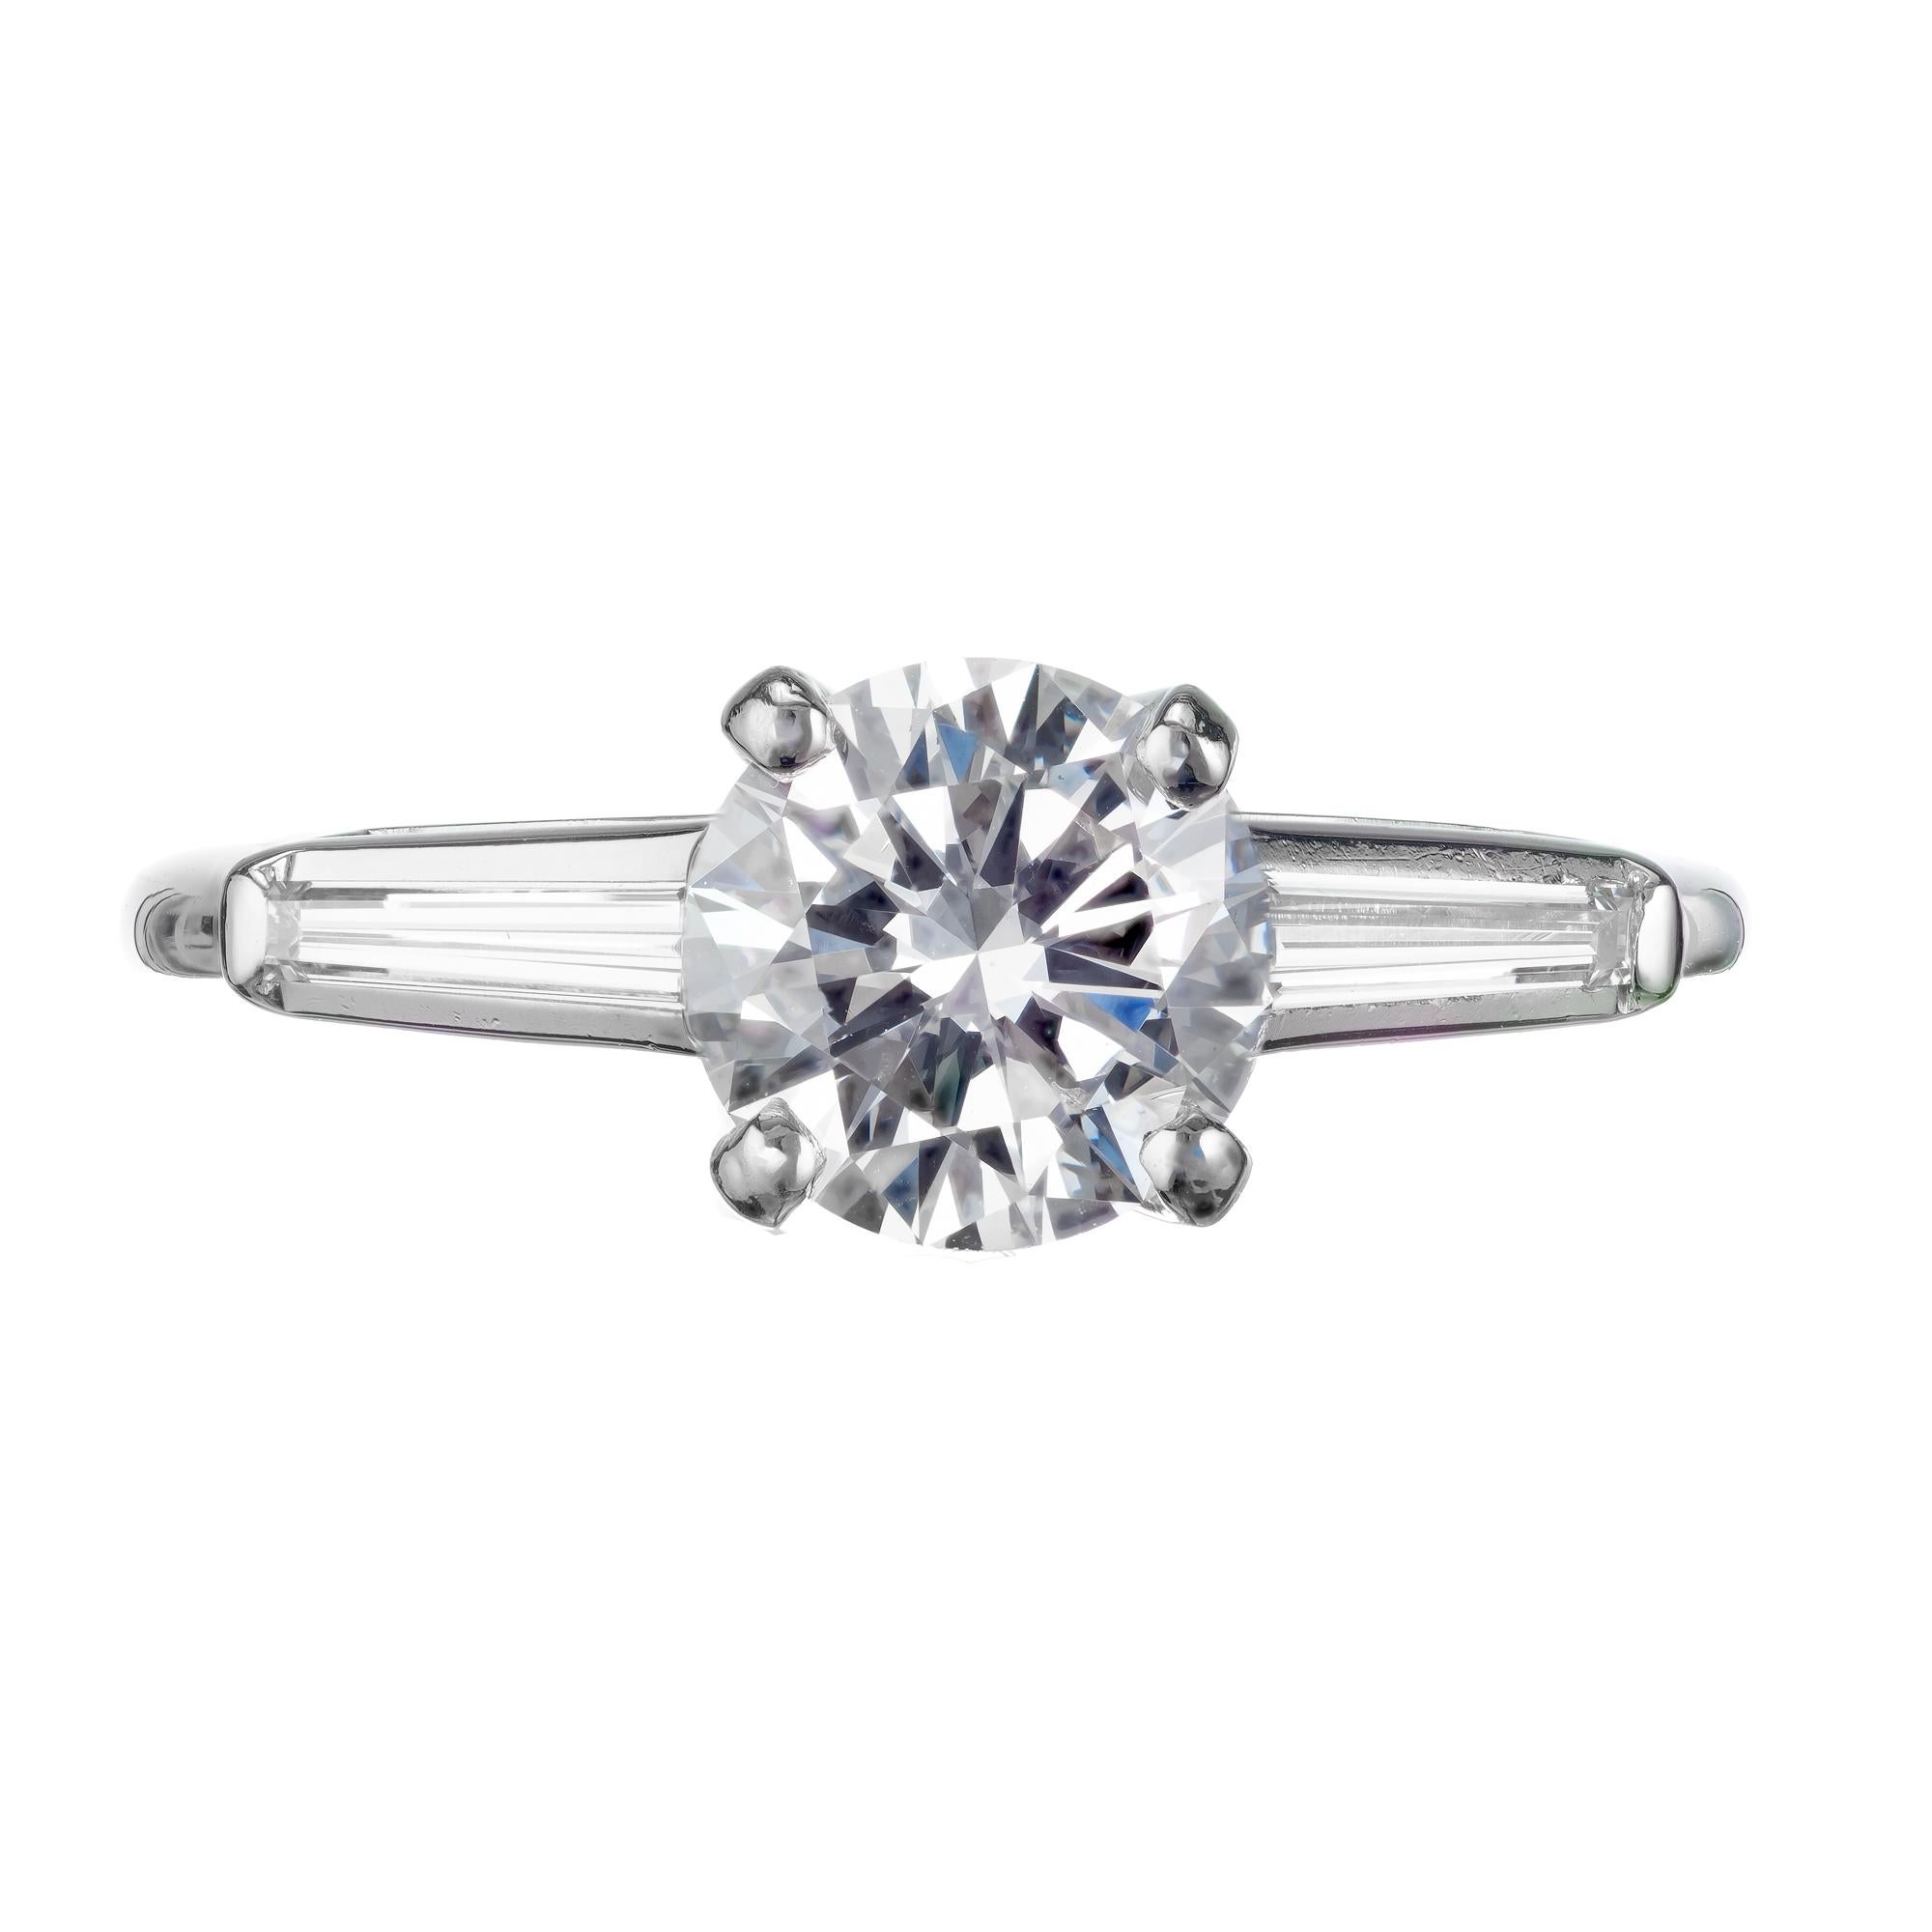 Ideal transitional cut diamond platinum engagement ring. Platinum setting with tapered baguette side diamonds. circa 1960.  GIA certified. 

1 round brilliant cut E VS diamond, Approximate 1.07cts GIA Certificate # 1172689908
2 tapered baguette G VS